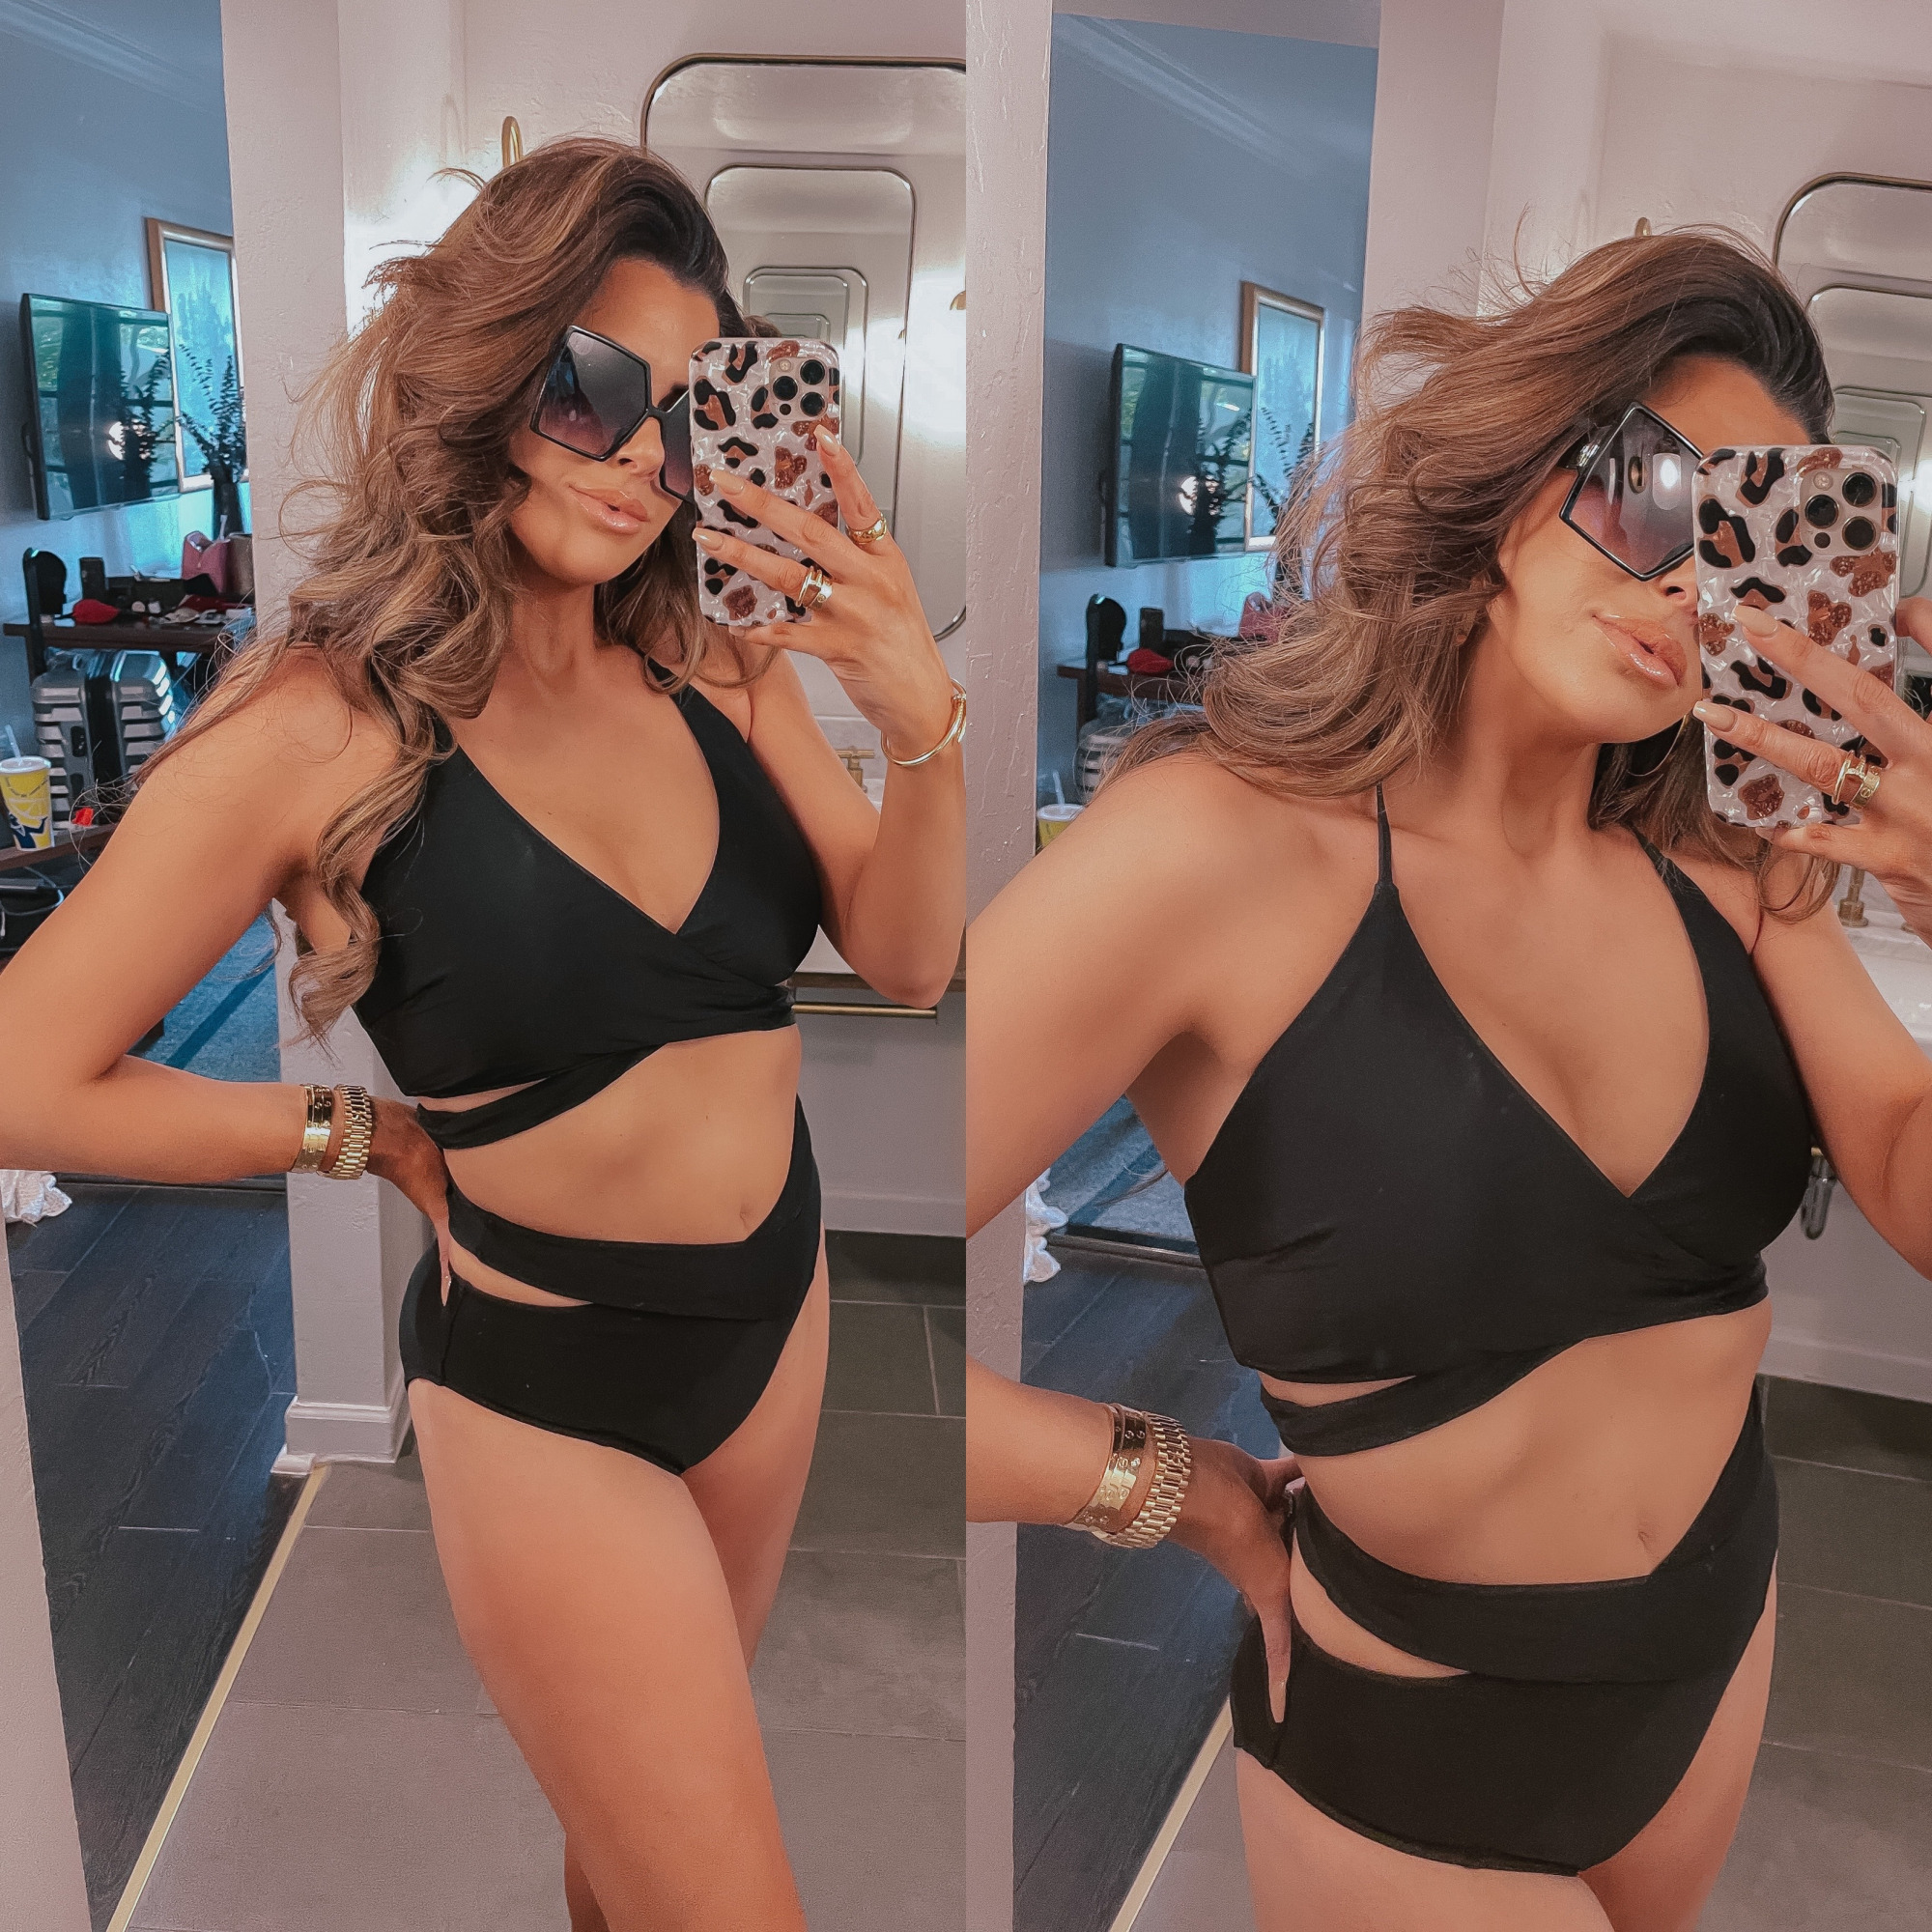 Amazon swimsuit review, best amazon two piece swimsuits, High waisted Amazon swimsuits emily gemma |Amazon High Waisted Swimsuit by popular US fashion blog, The Sweetest Thing: image of a Emily Gemma wearing a black Amazon two piece cut out swimsuit with black square frame sunglasses. 